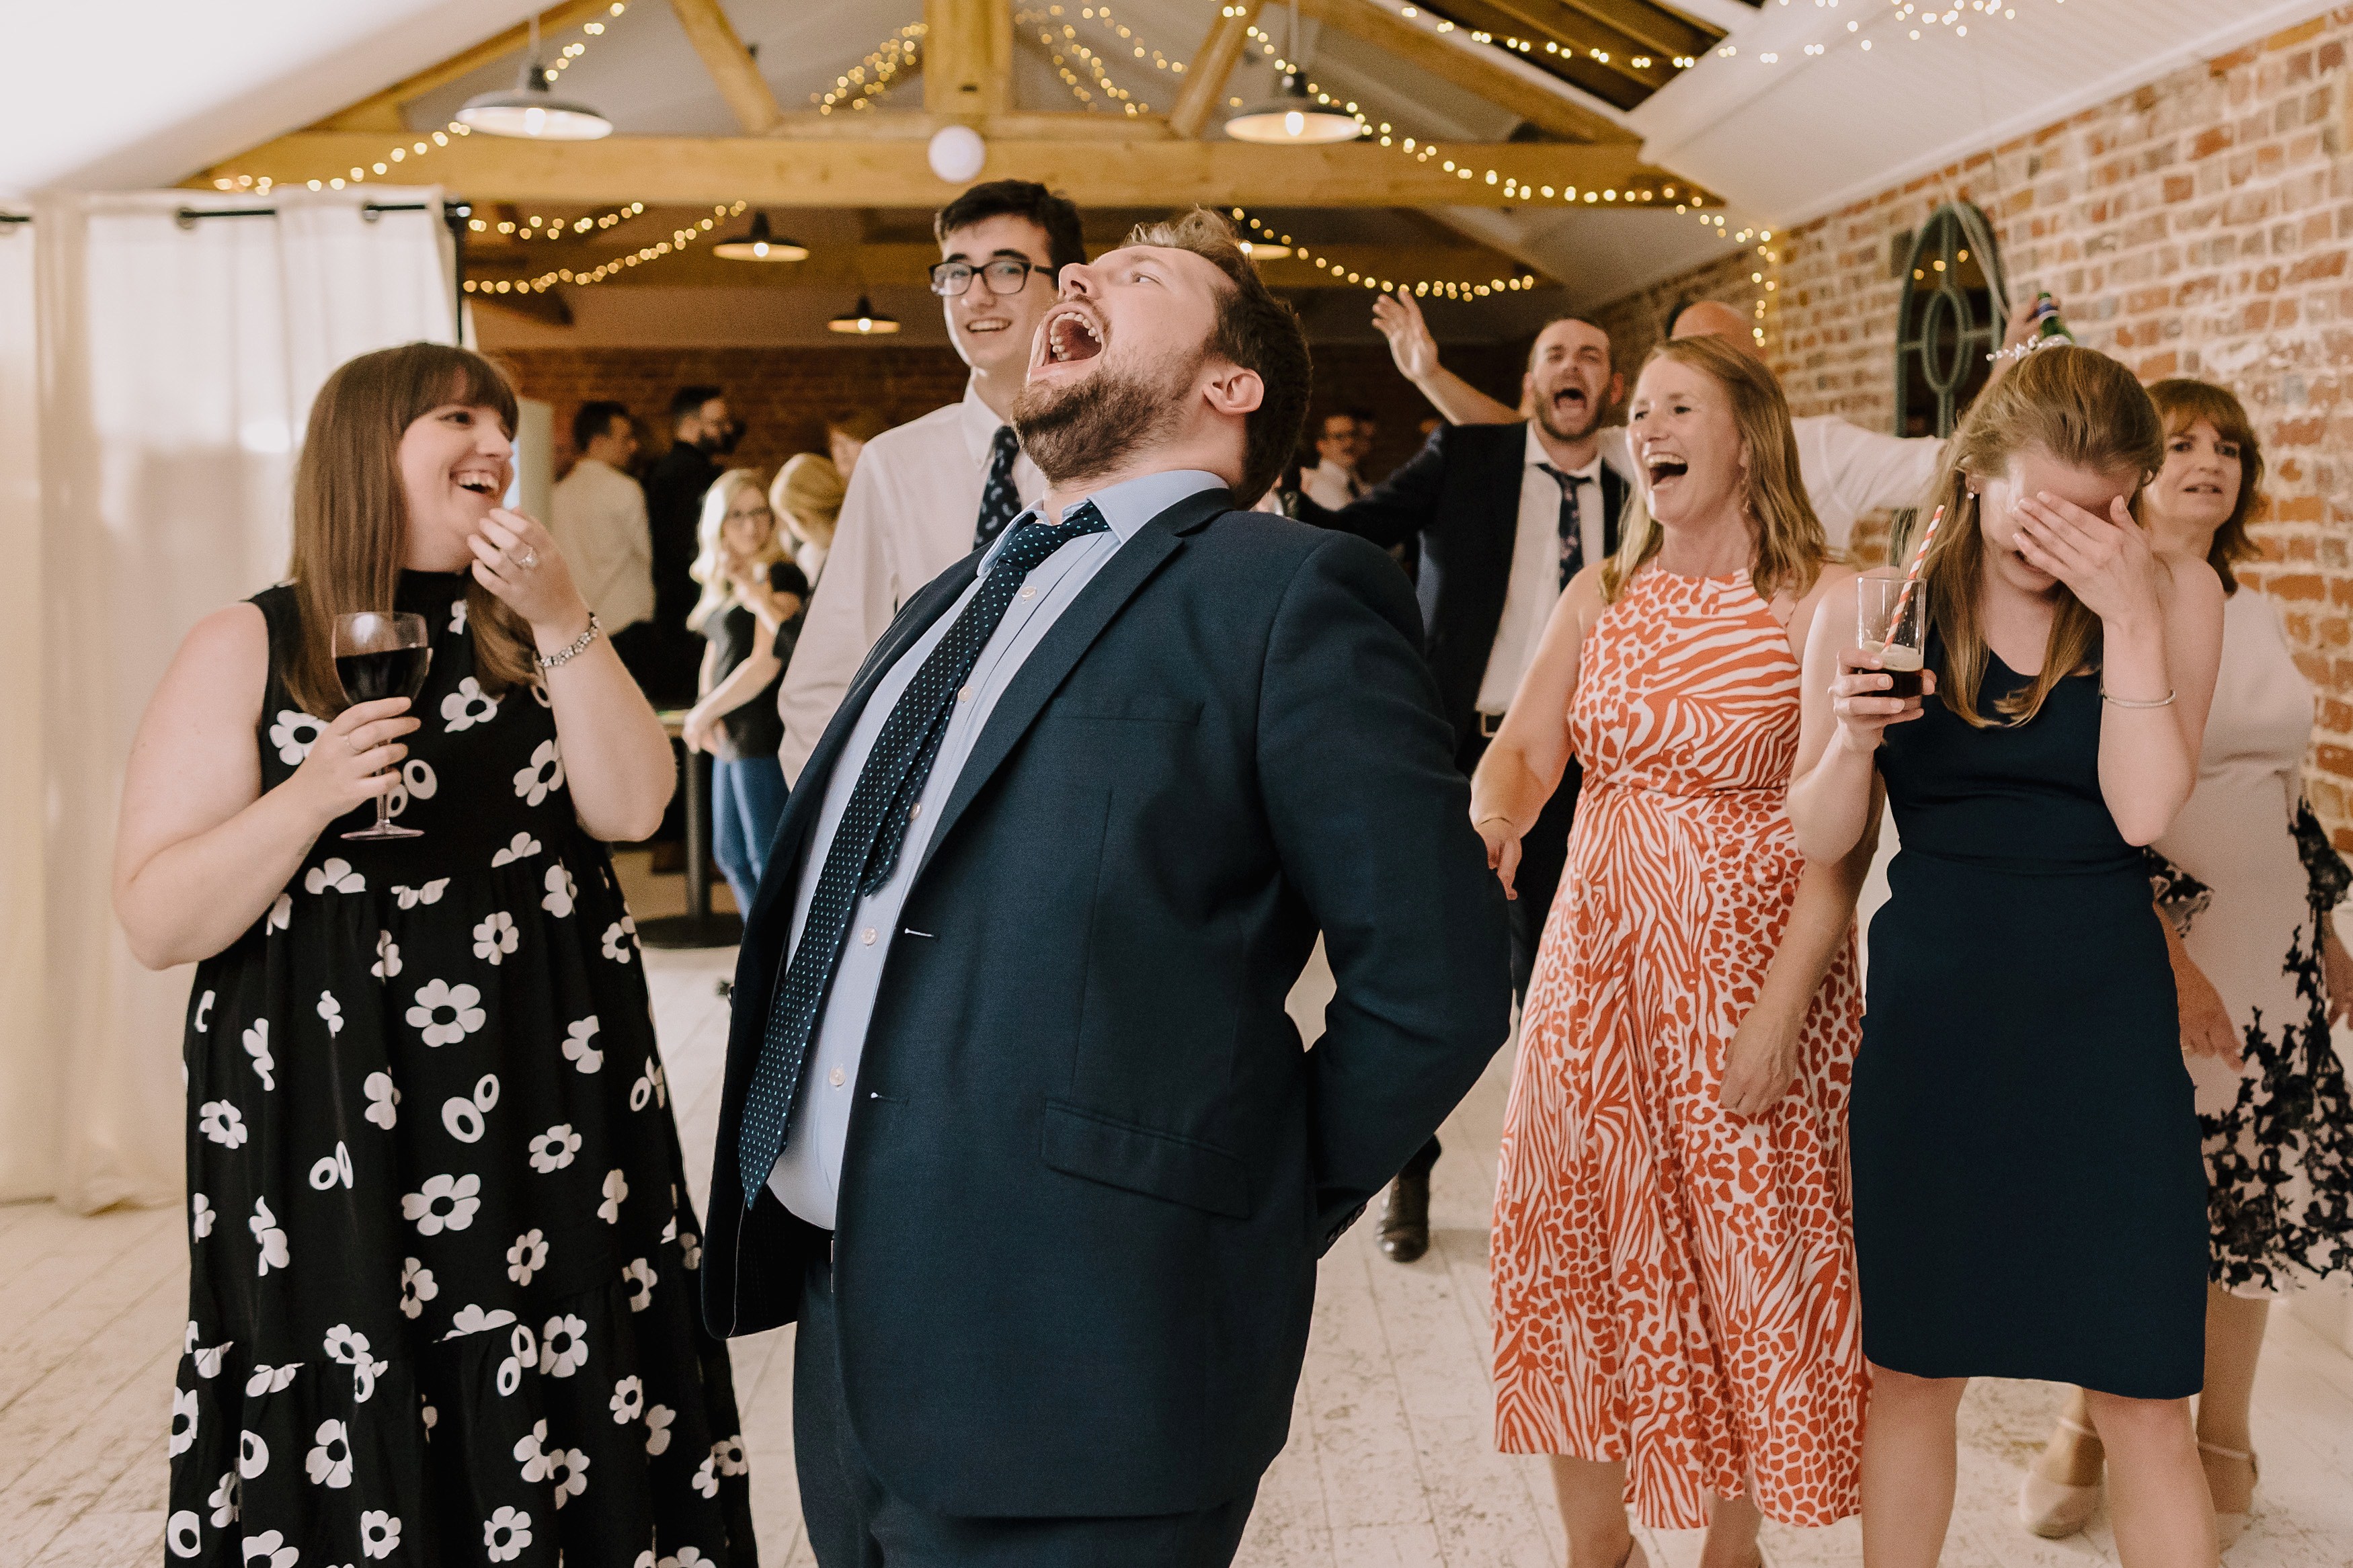 A group of wedding guests laughing during the wedding reception